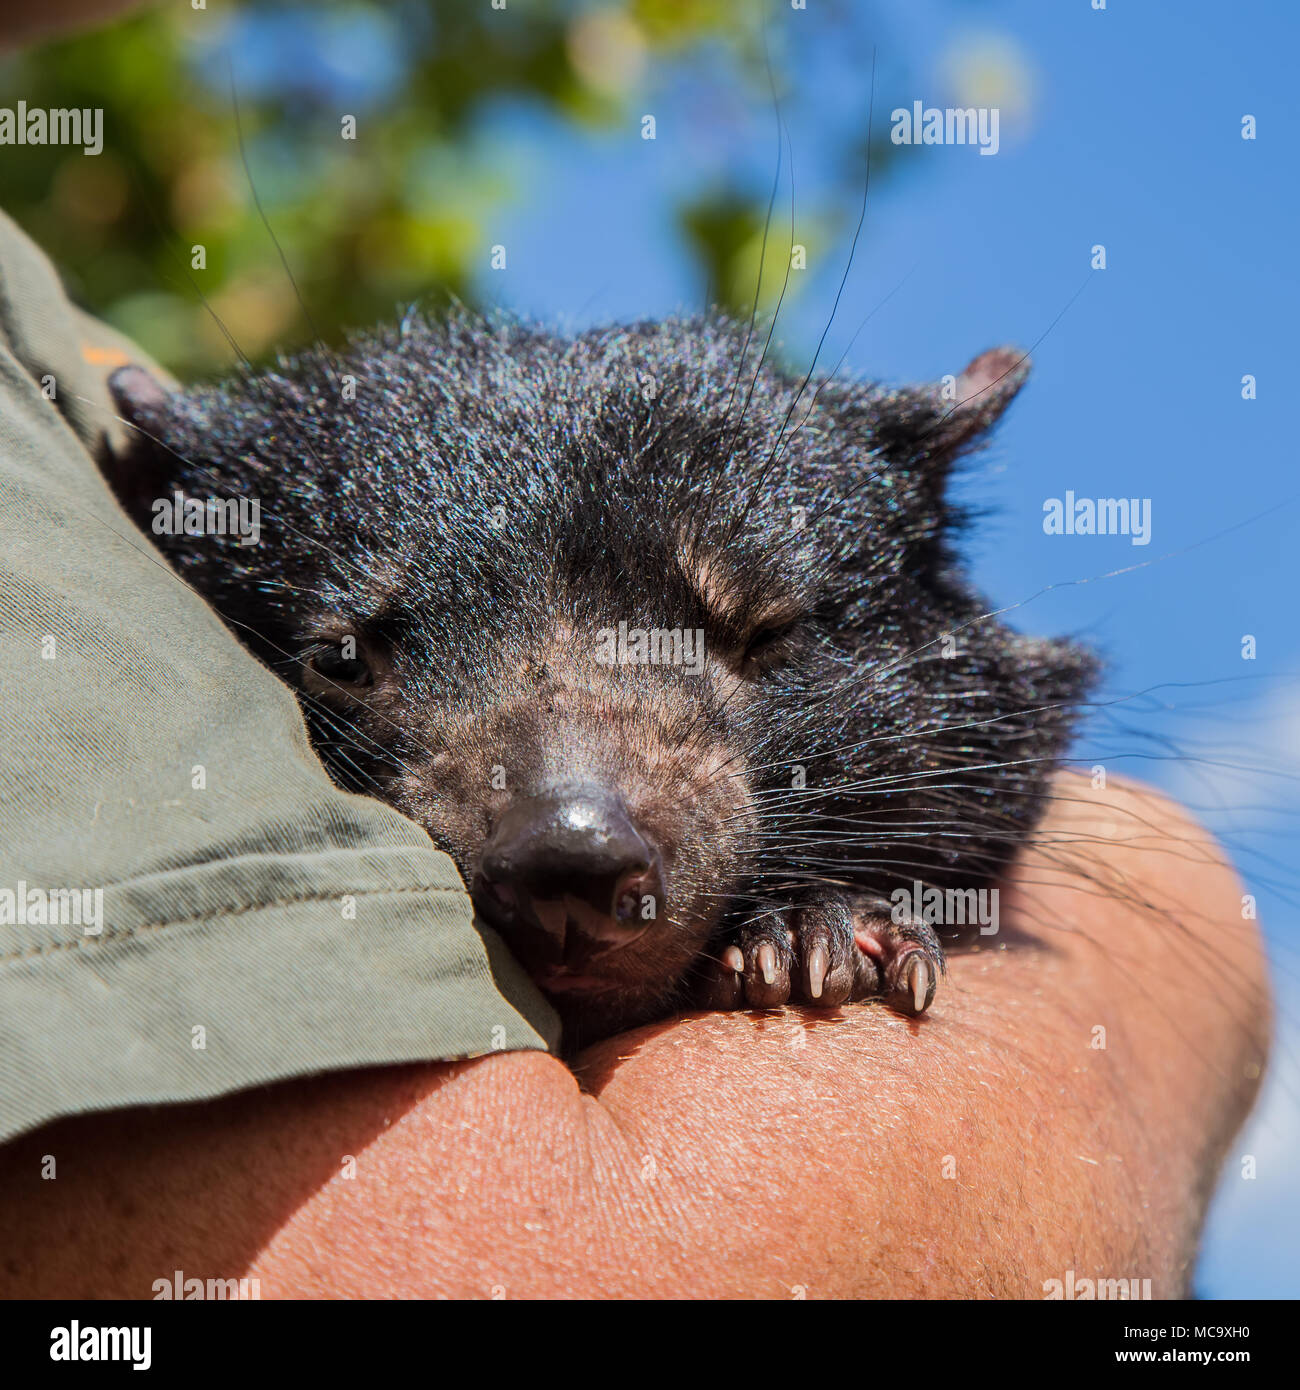 Tasmanian Devil, part of a project to save the Tasmanian Devil from extinction. March 5, 2016. Stock Photo